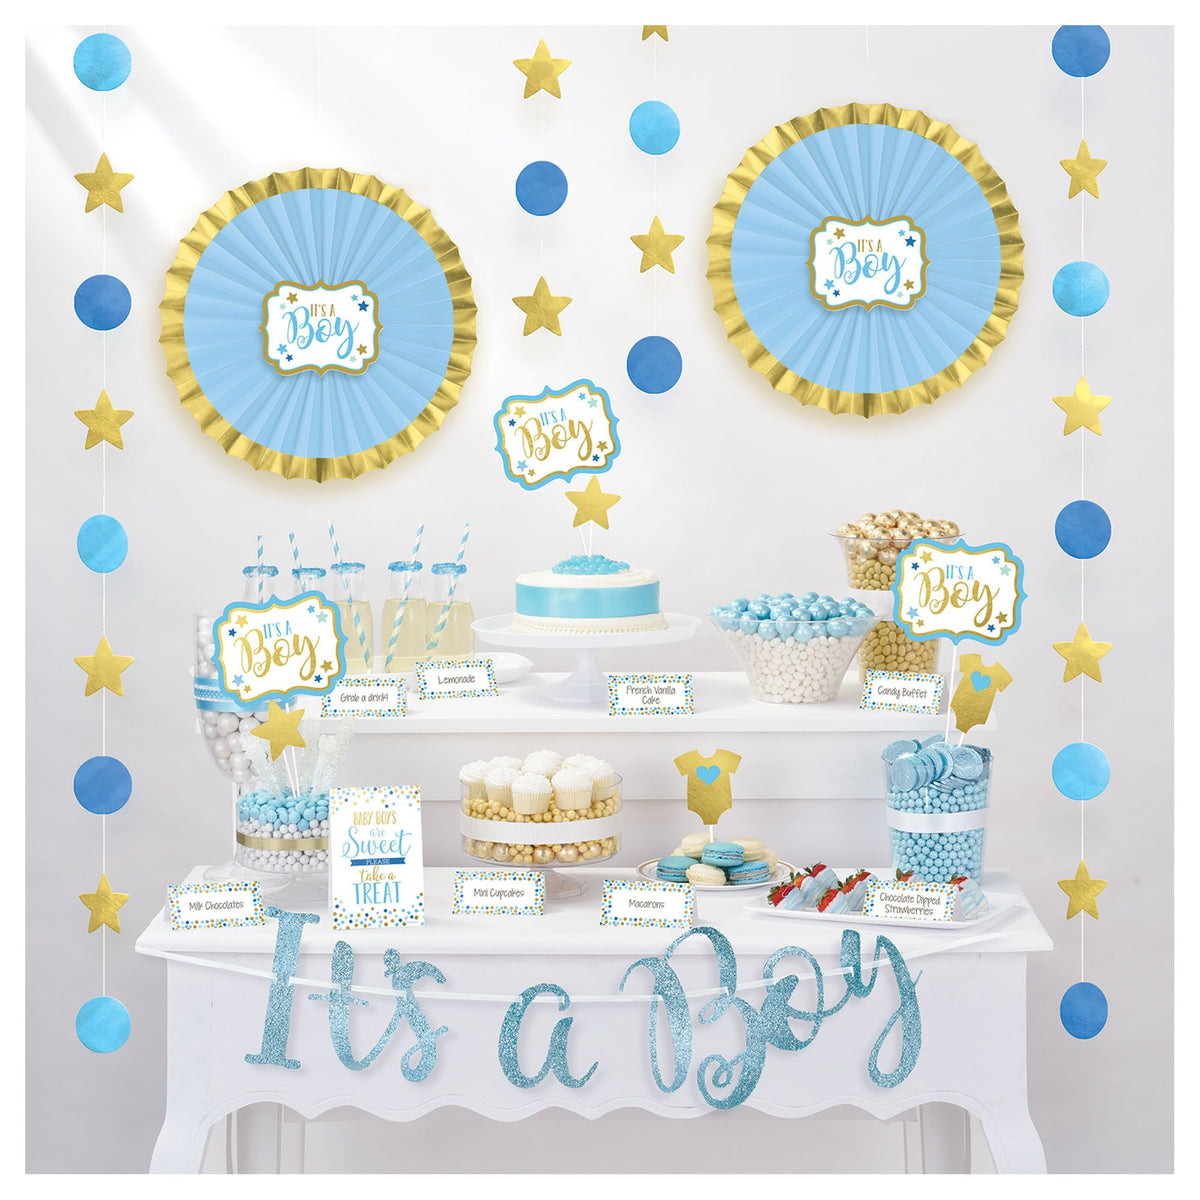 Caribbean Blue Bottle Baby Shower Candy | Holiday & Occasion Party